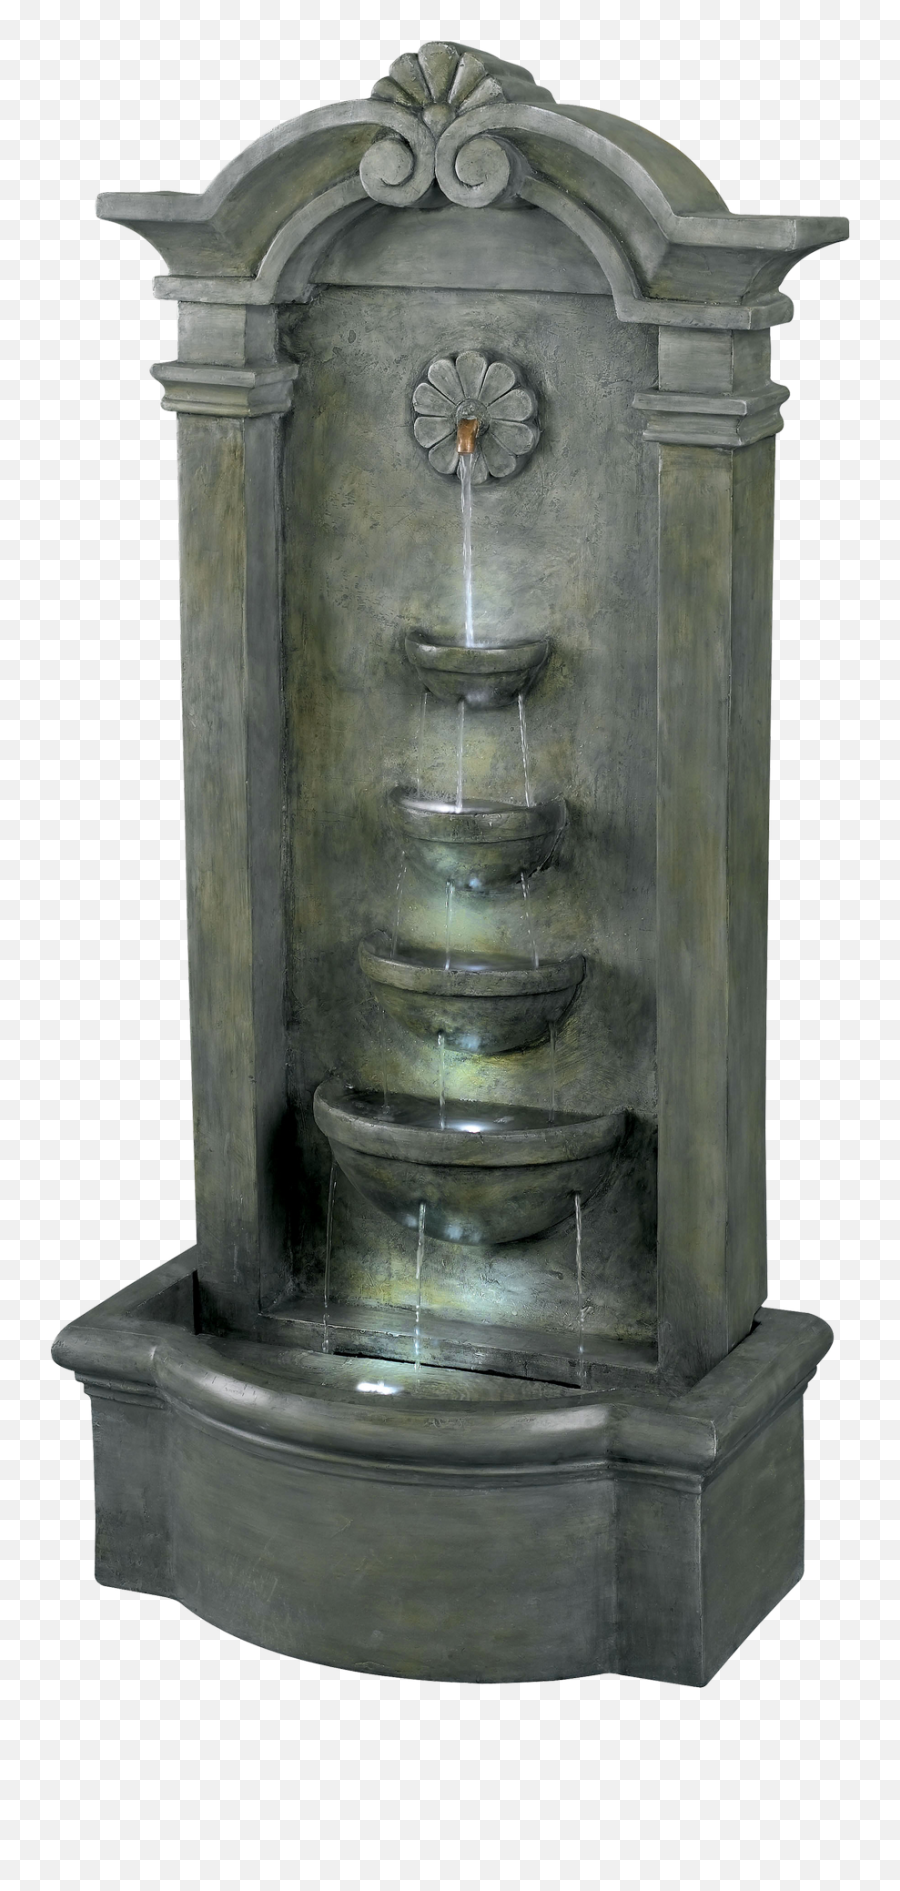 Download Fountain Png Image For Free